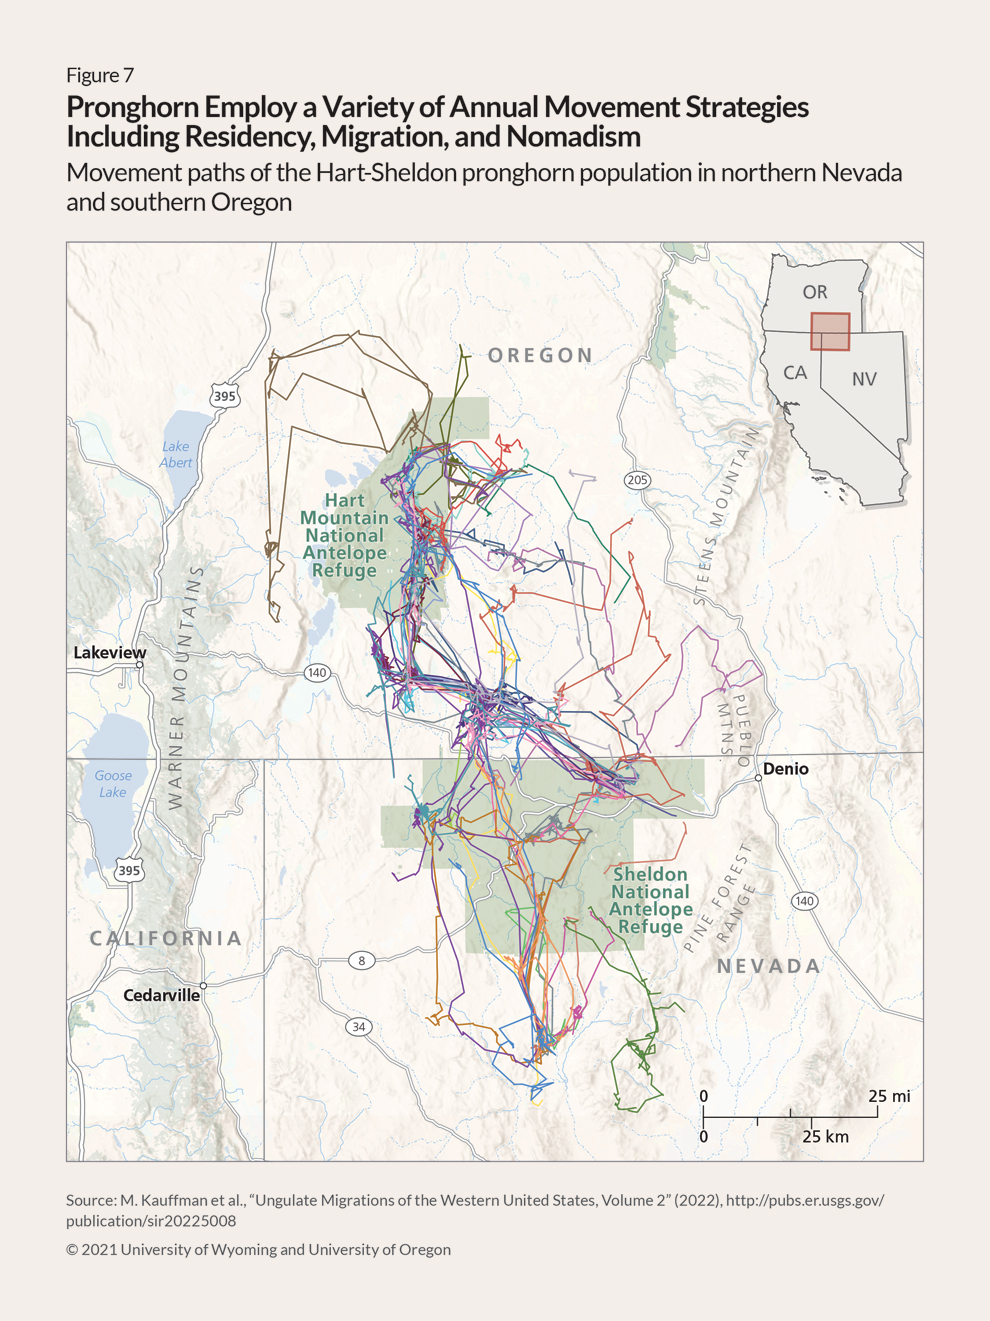 Map showing more than a dozen paths taken by various pronghorn from south of the Sheldon National Antelope Refuge—a large area in northwest Nevada—to northwest of the Hart Mountain National Antelope Refuge, a smaller area in southeastern Oregon. Some of the paths are short, indicating that those pronghorn are considered resident in those areas, while others move back and forth in a regular pattern between the two refuges, converging in a concentrated zone between the two protected areas, which means that those pronghorn are migrating. Still other lines wander in various directions, seemingly at random. Those pronghorn are considered nomadic. 